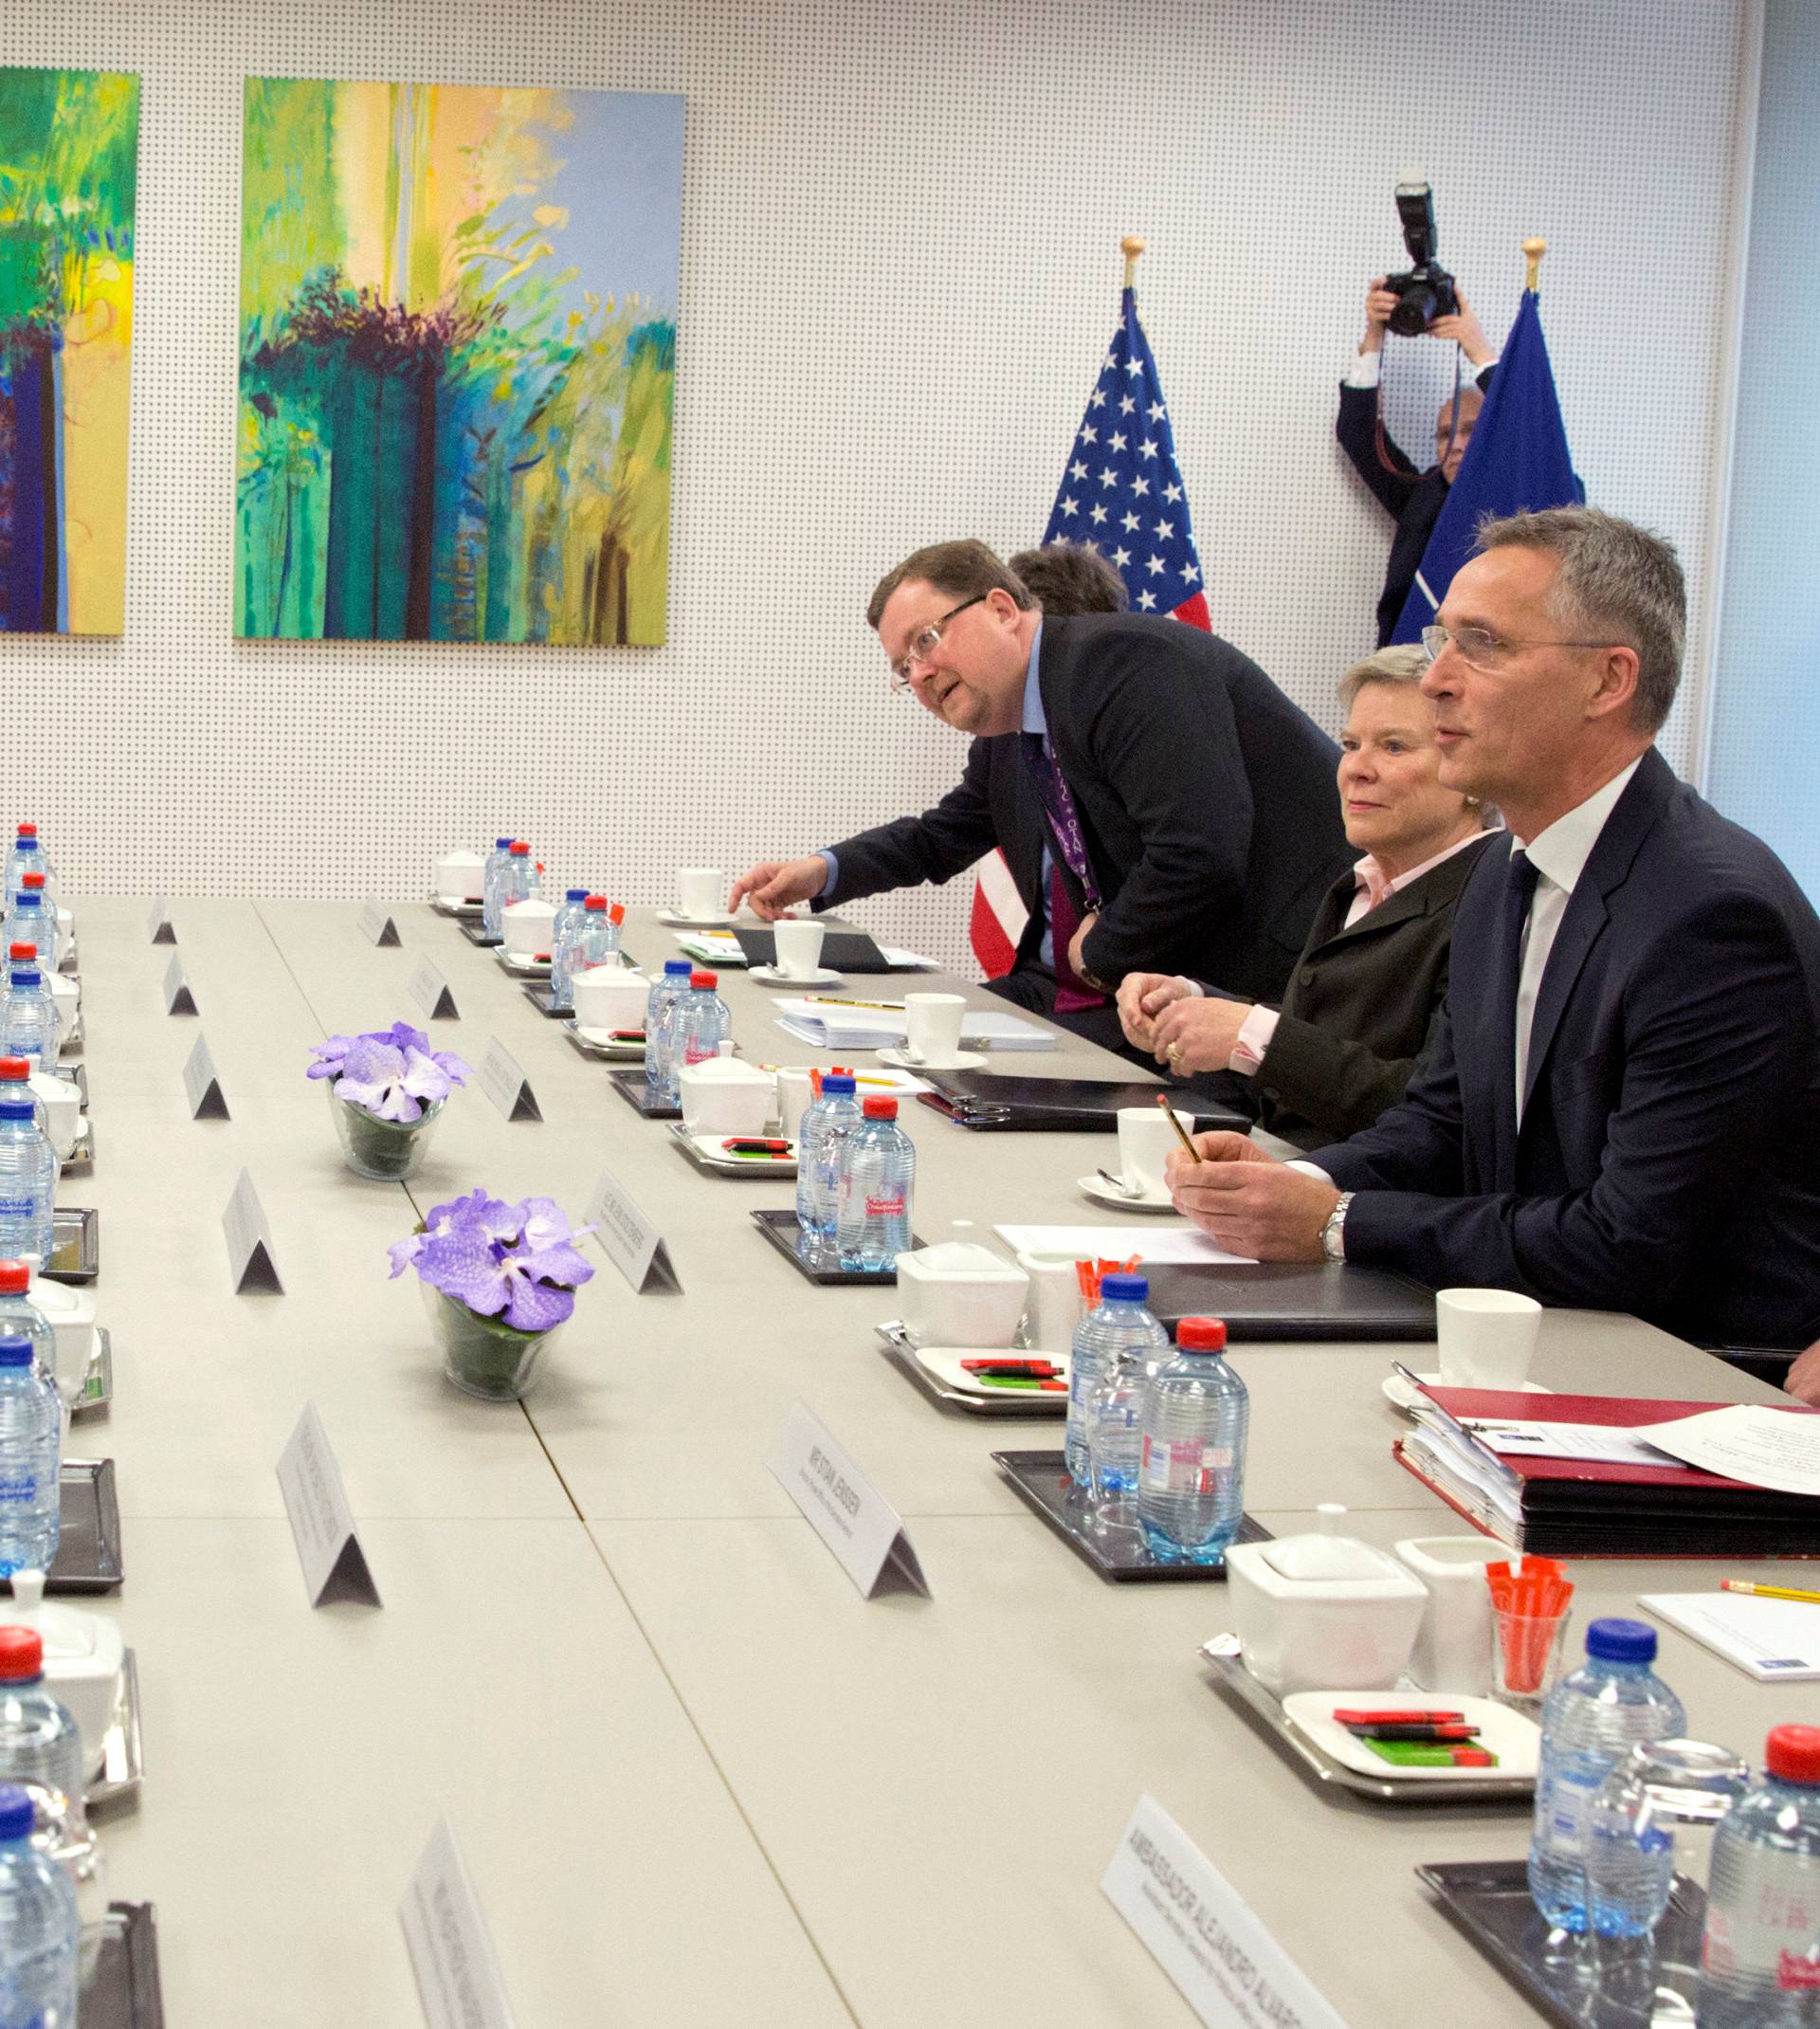 U.S. Secretary of State Mike Pompeo and NATO Secretary General Jens Stoltenberg attend a NATO foreign ministers meeting at the Alliance's headquarters in Brussels